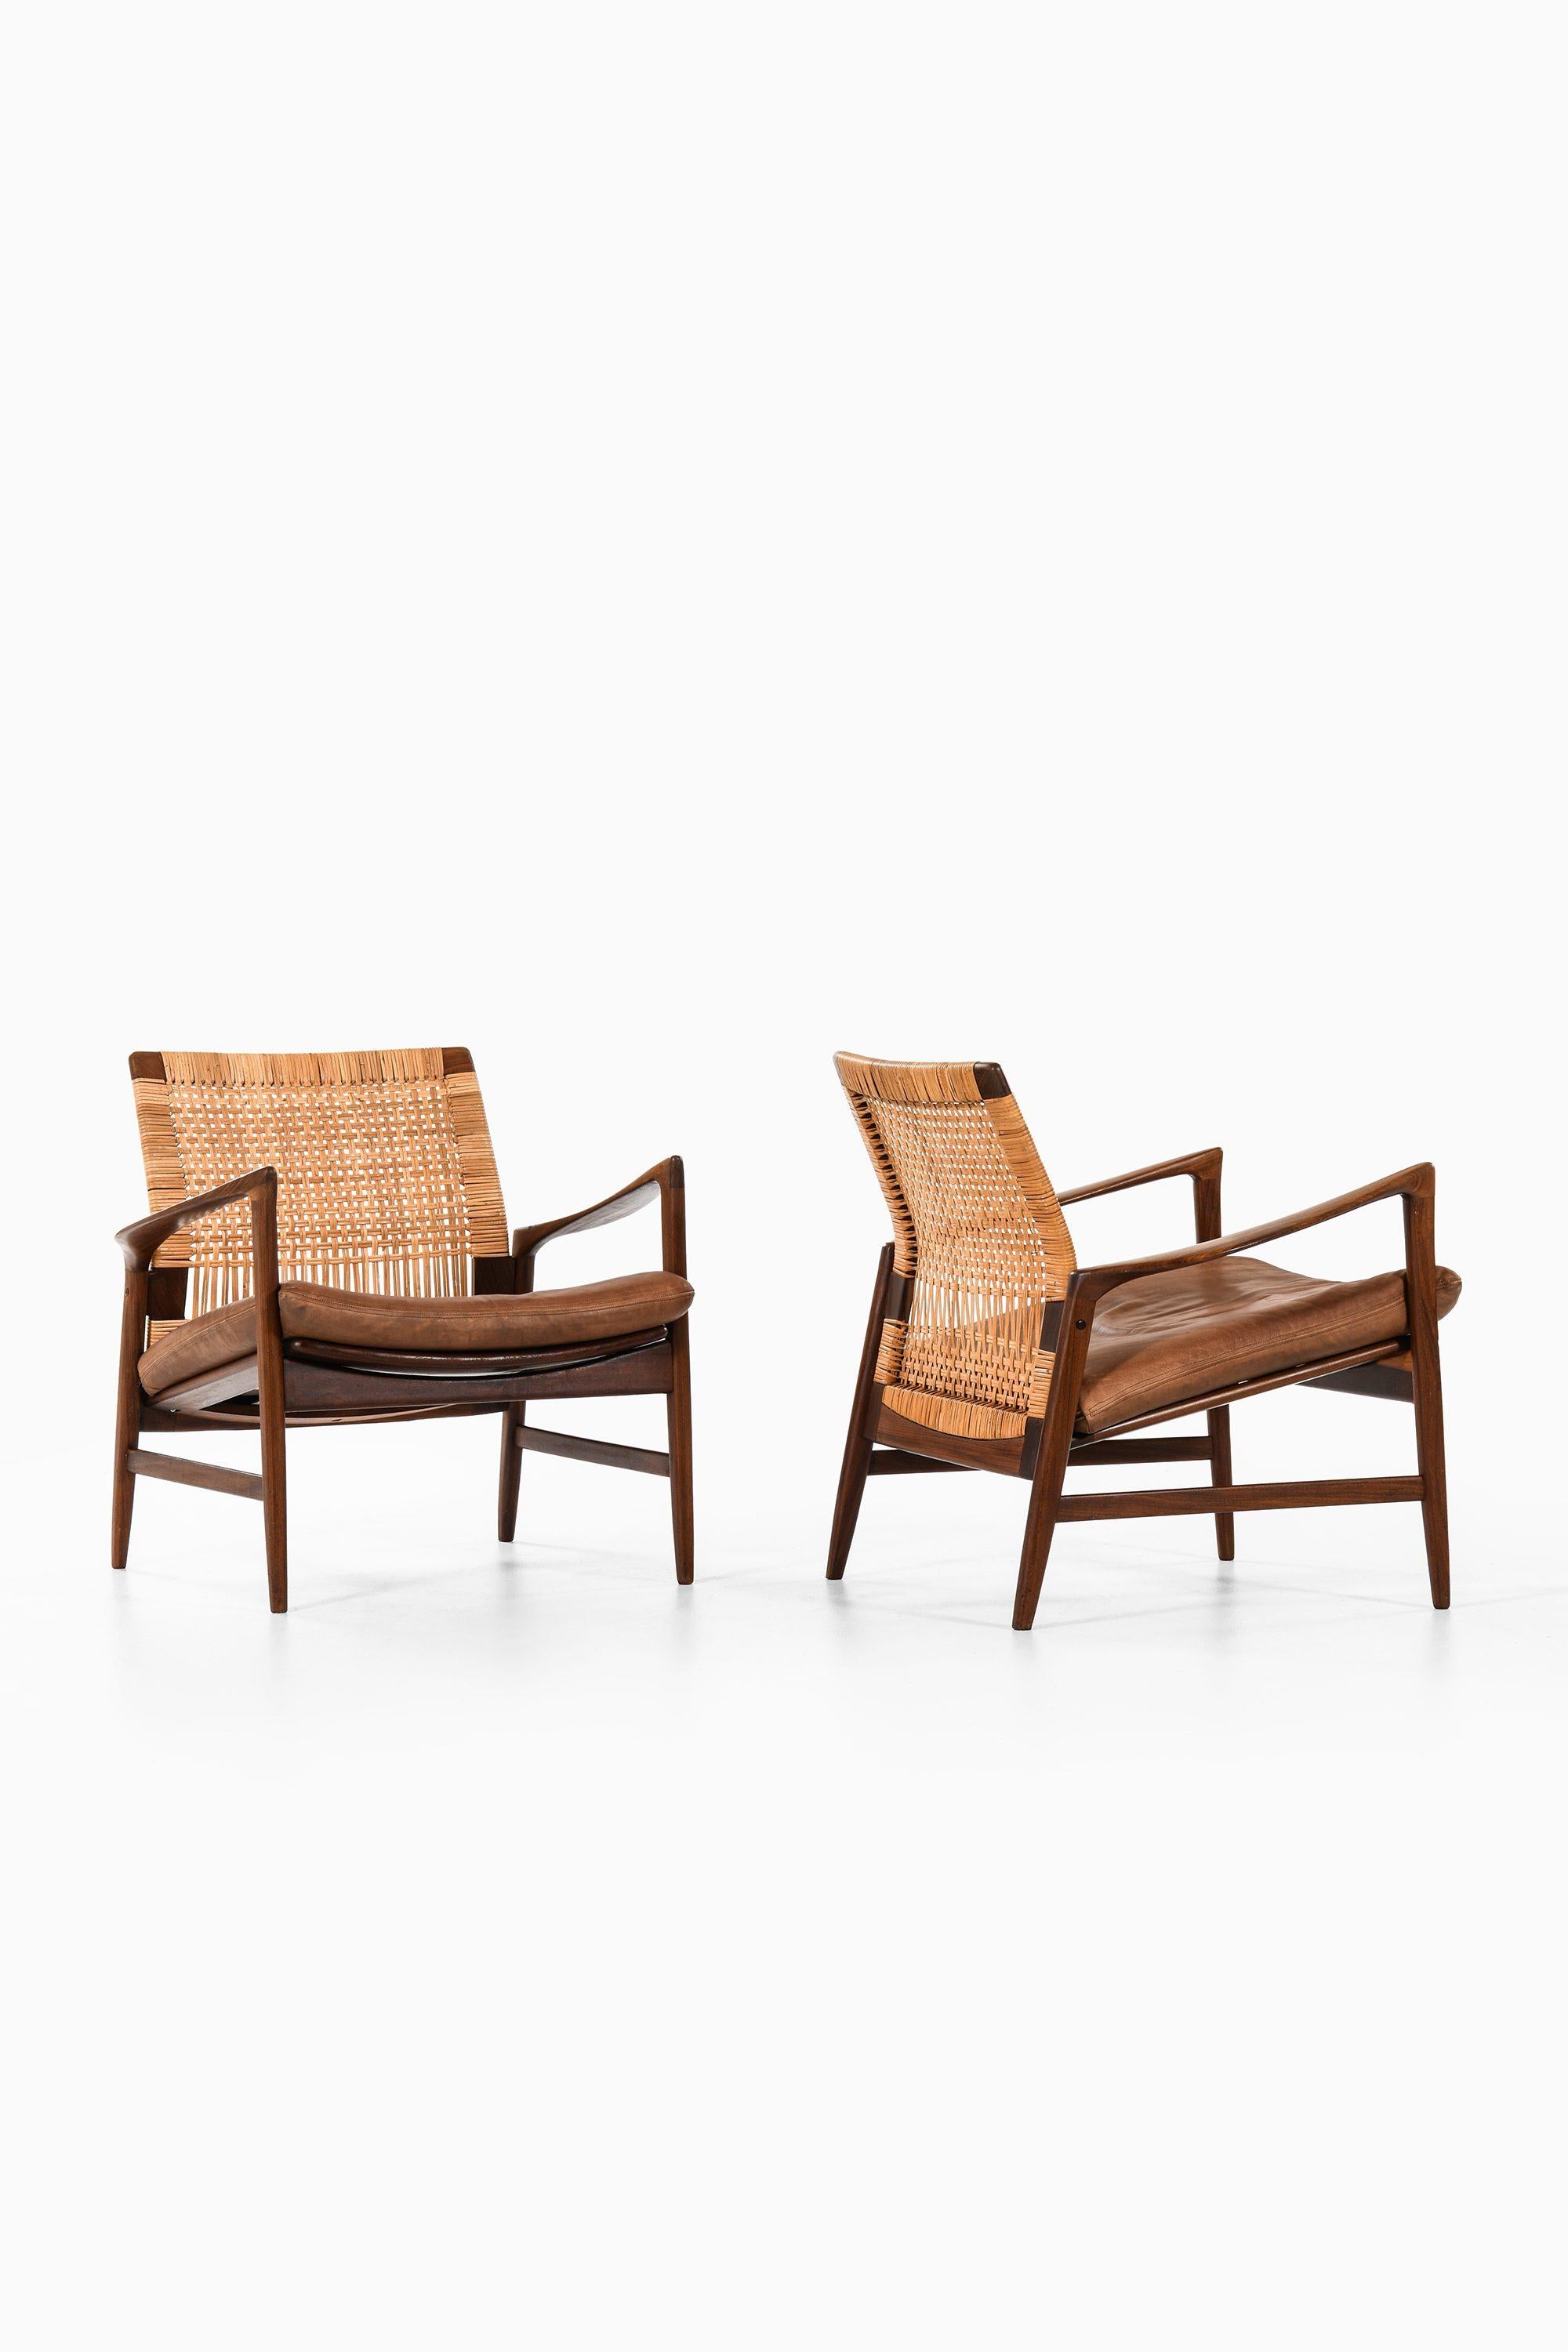 Pair of Easy Chairs in Teak, Cane with Original Brown Leather By Ib Kofod-Larsen, 1950’S

Additional Information:
Material: Teak, cane and original brown leather
Style: midcentury, Scandinavian
Very rare pair of easy chairs model Åre
Produced